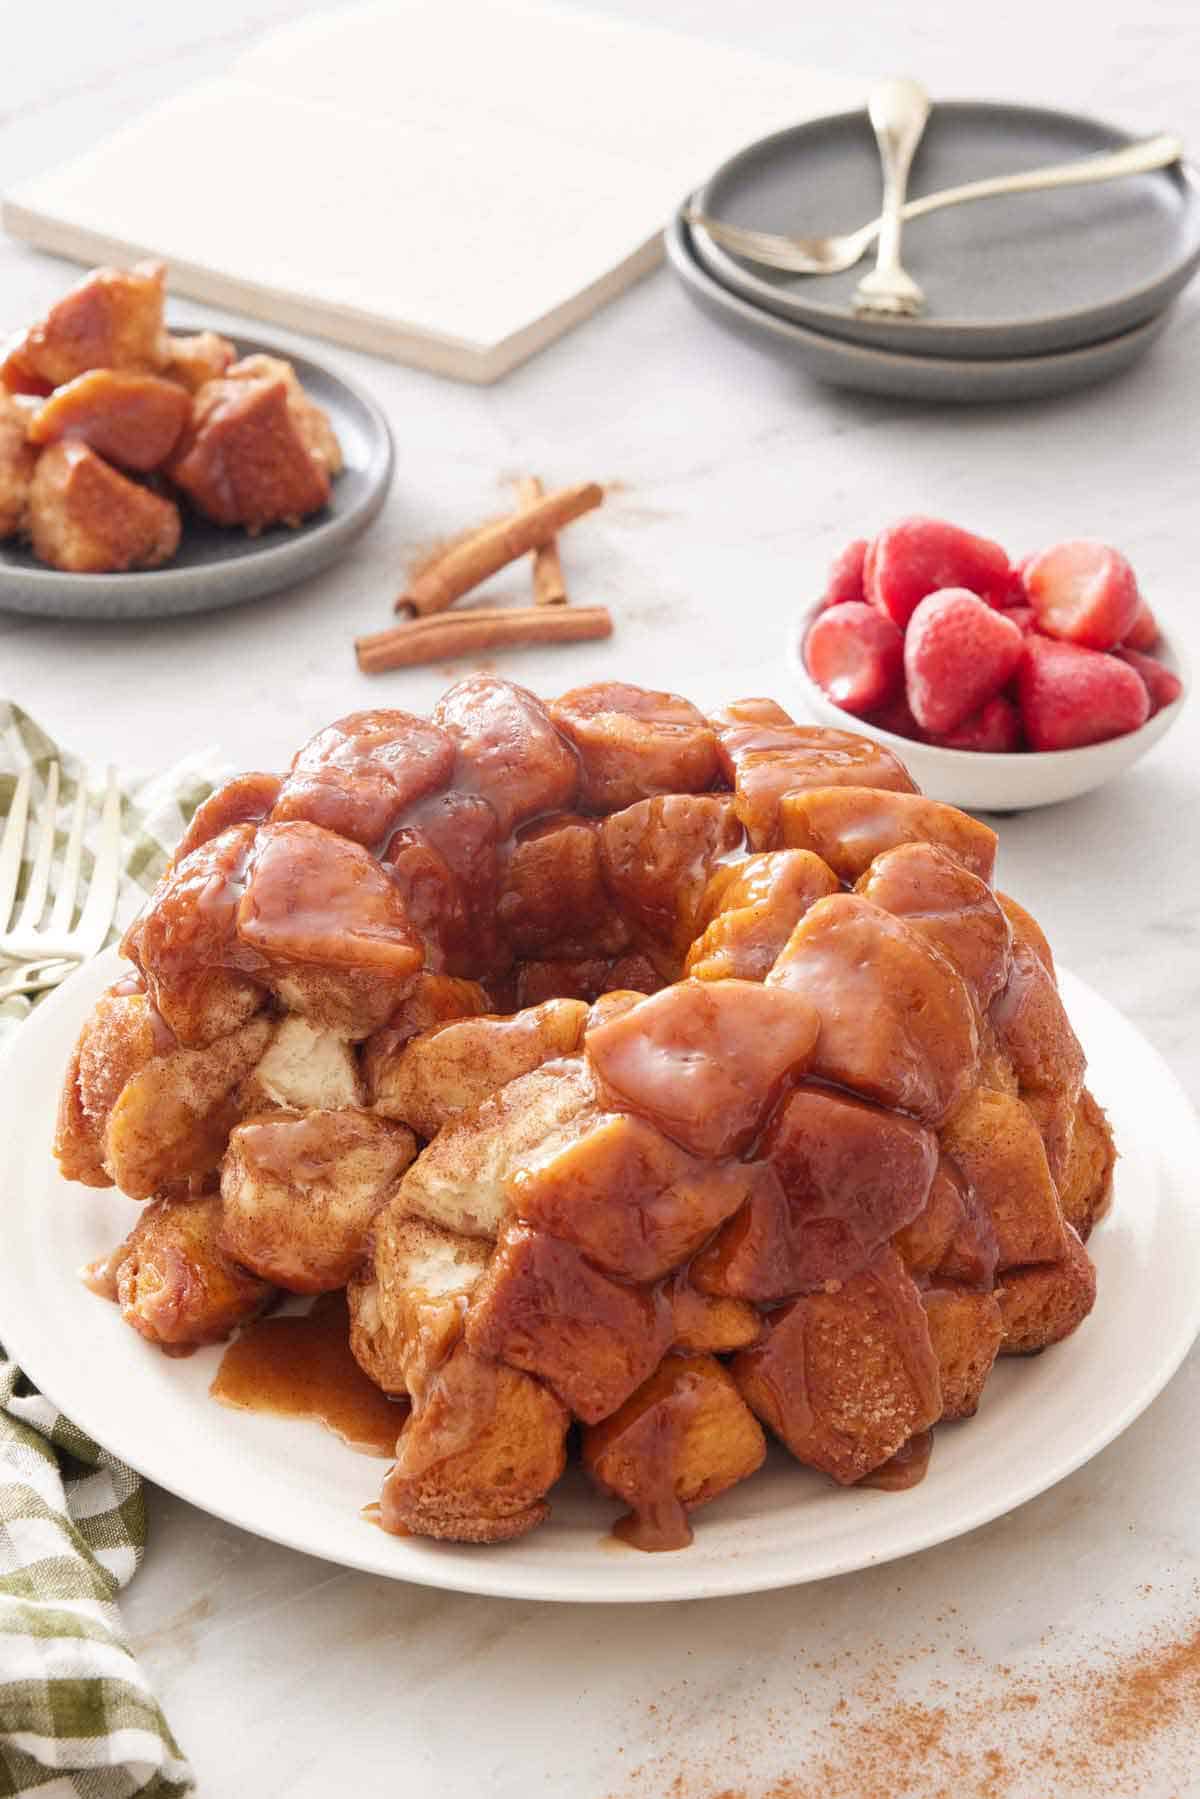 A platter with monkey bread with a slice cut out. Plated serving, strawberries, cinnamon sticks, stack of bowls, forks, and a notebook in the background.